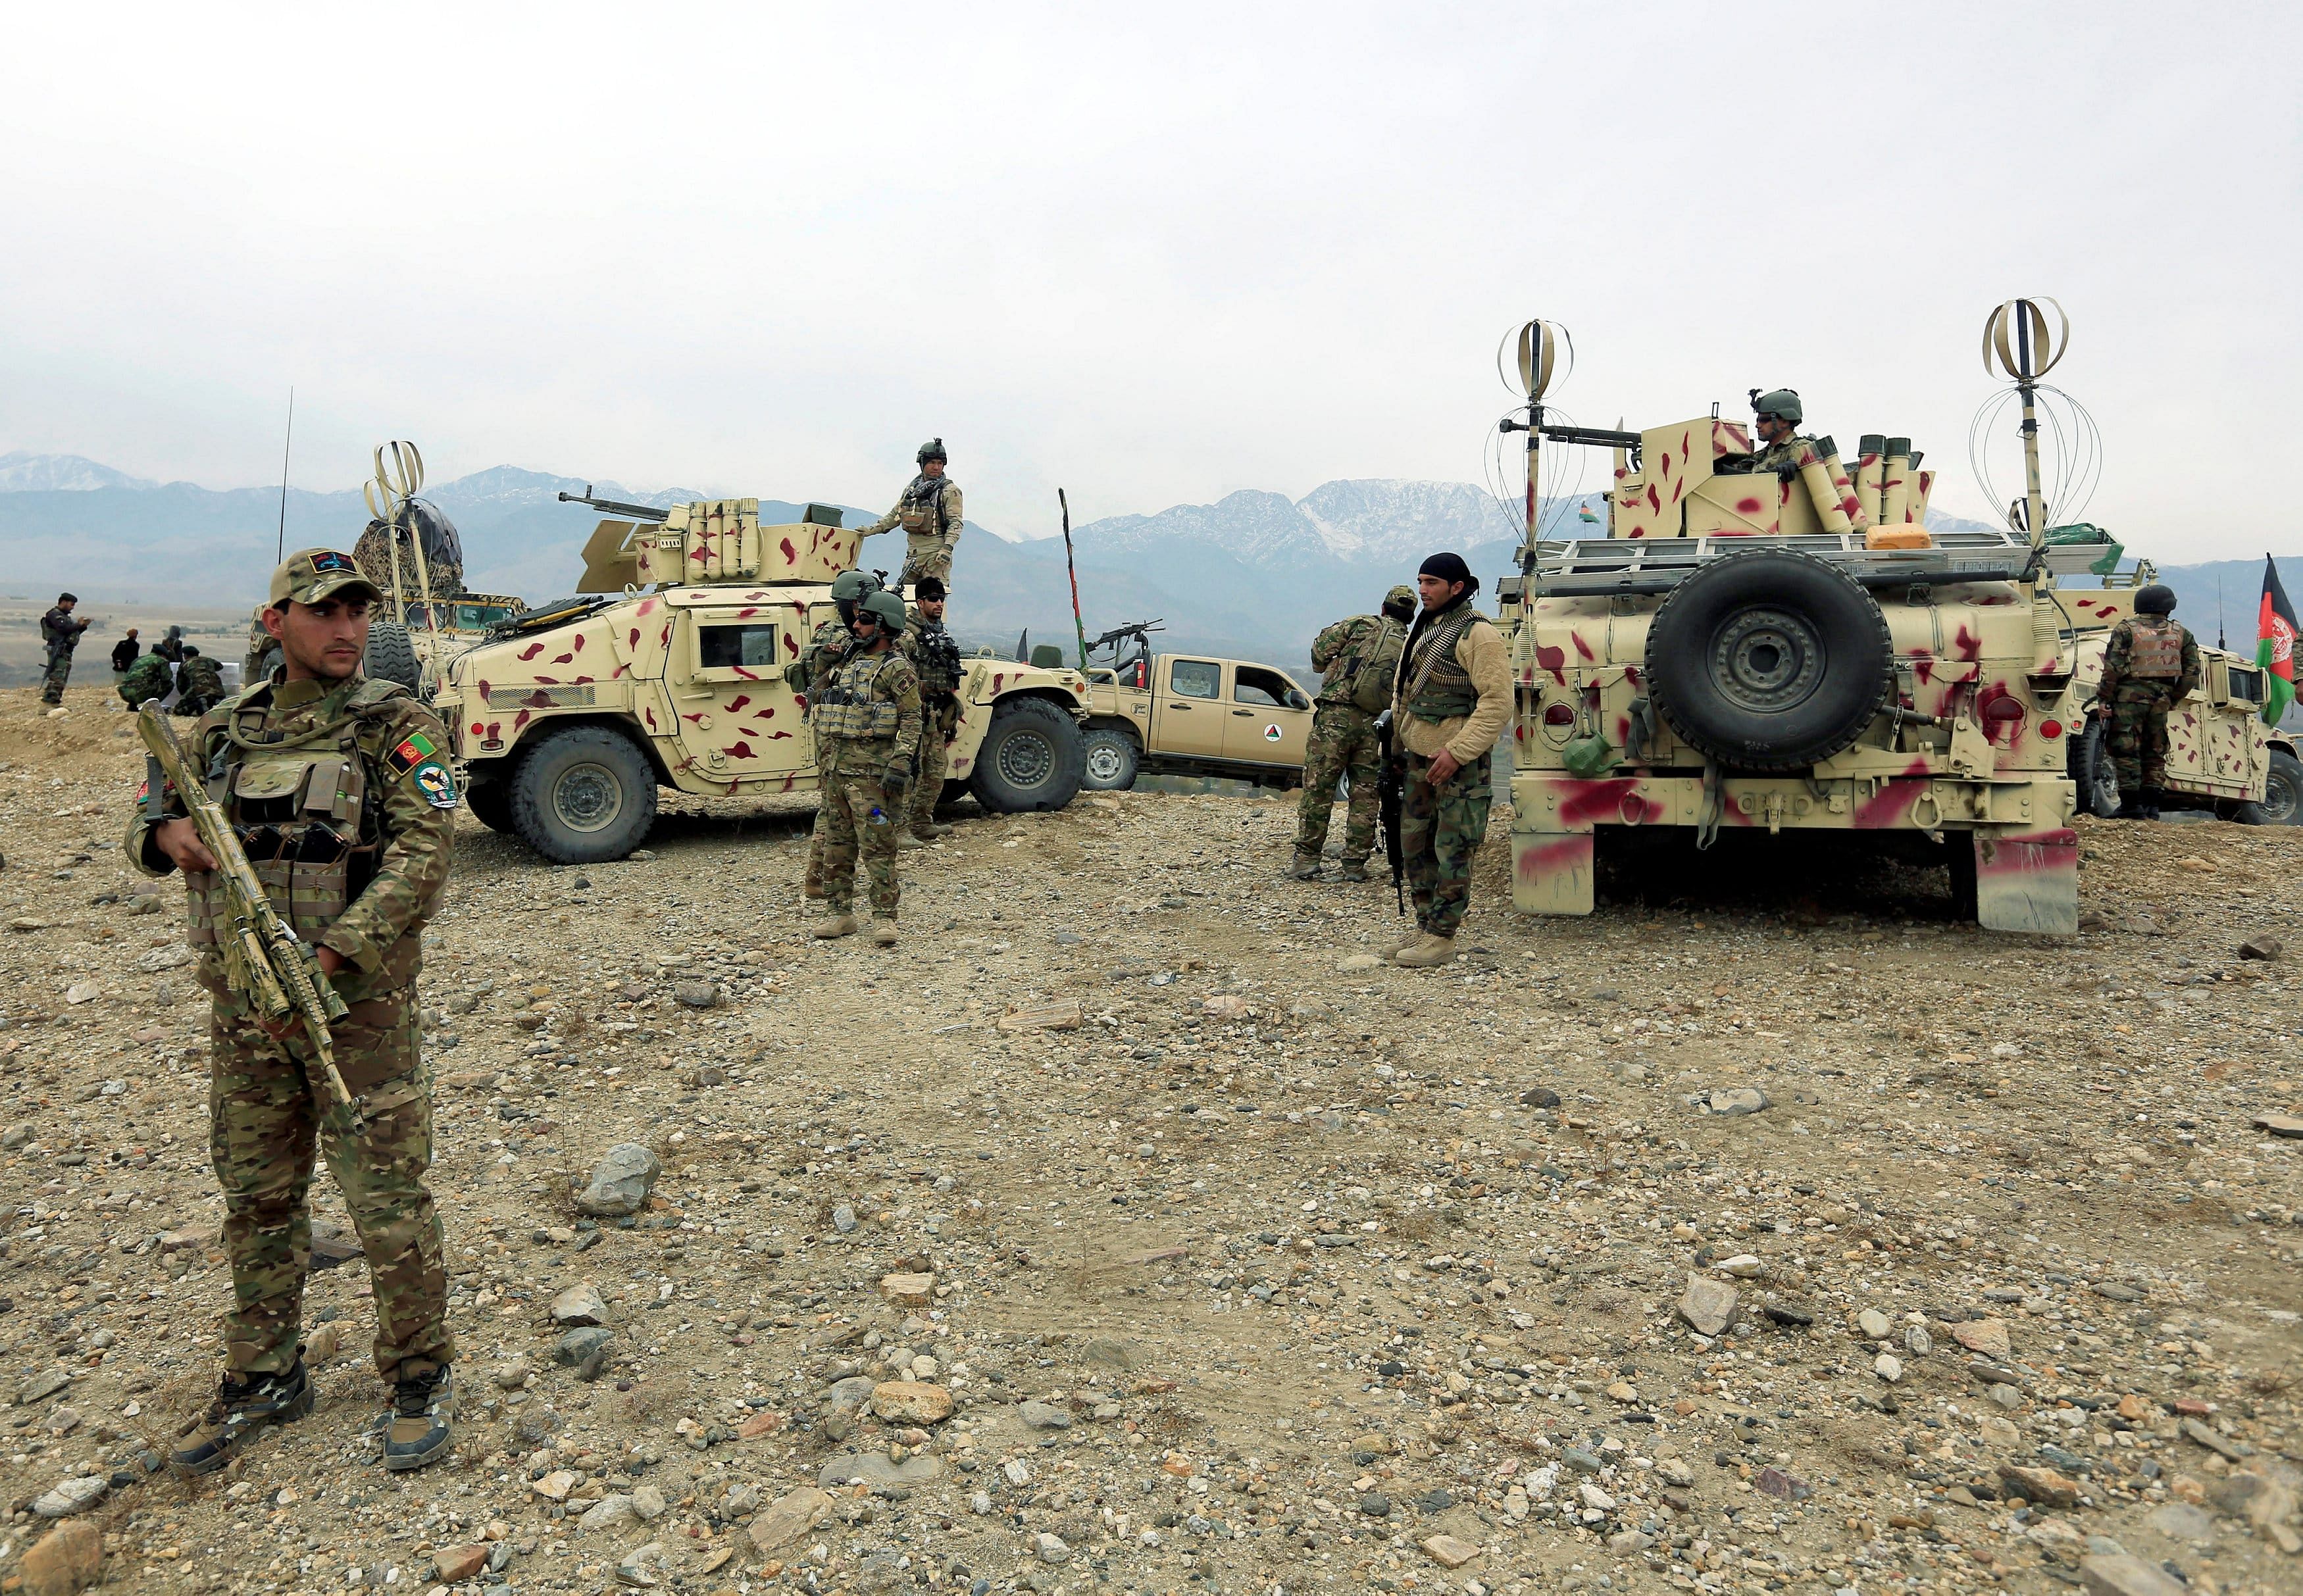 The United States and its allies will withdraw all their forces from Afghanistan within 14 months if the Taliban abide by the Doha agreement, Washington and Kabul said in a joint statement. (Credit: Reuters Photo)